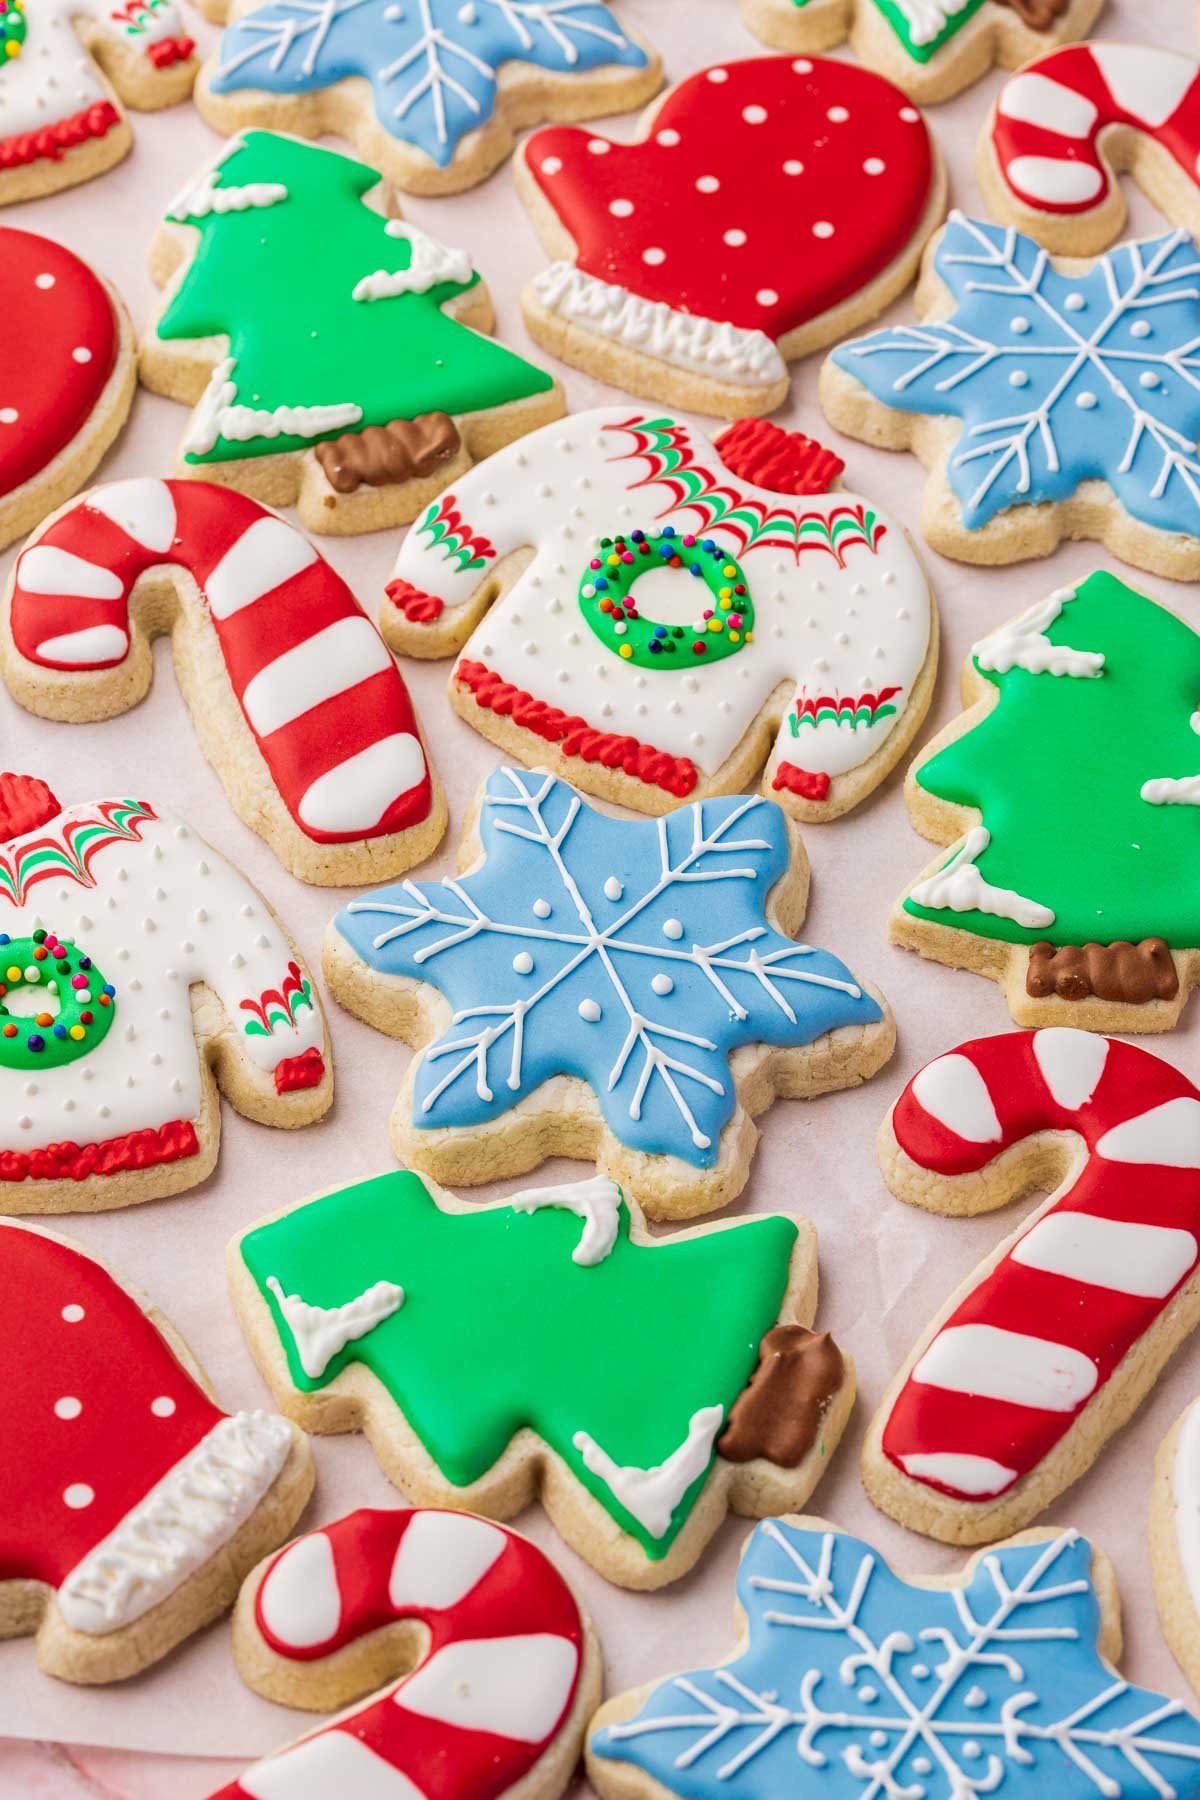 A close up of gluten-free Christmas cookies decorated with royal icing as ugly Christmas sweaters, snowflakes, Christmas trees, candy canes and polka dot mittens.